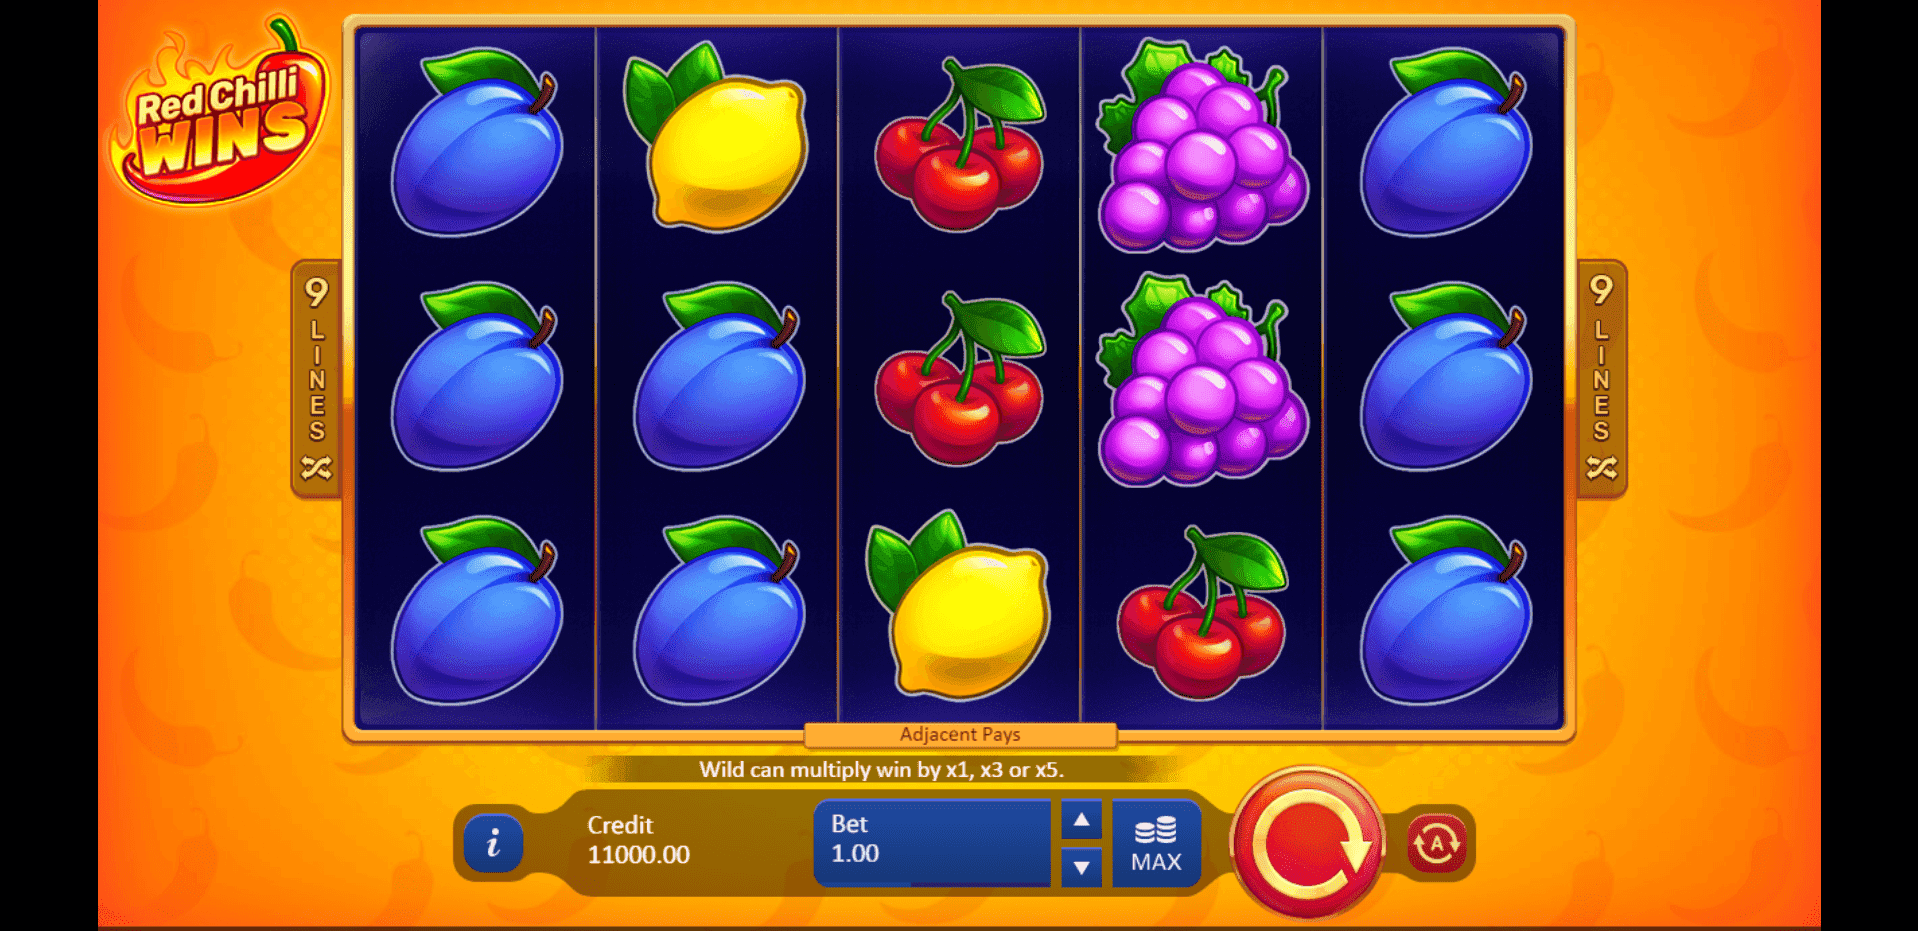 Red Chilli Wins slot play free